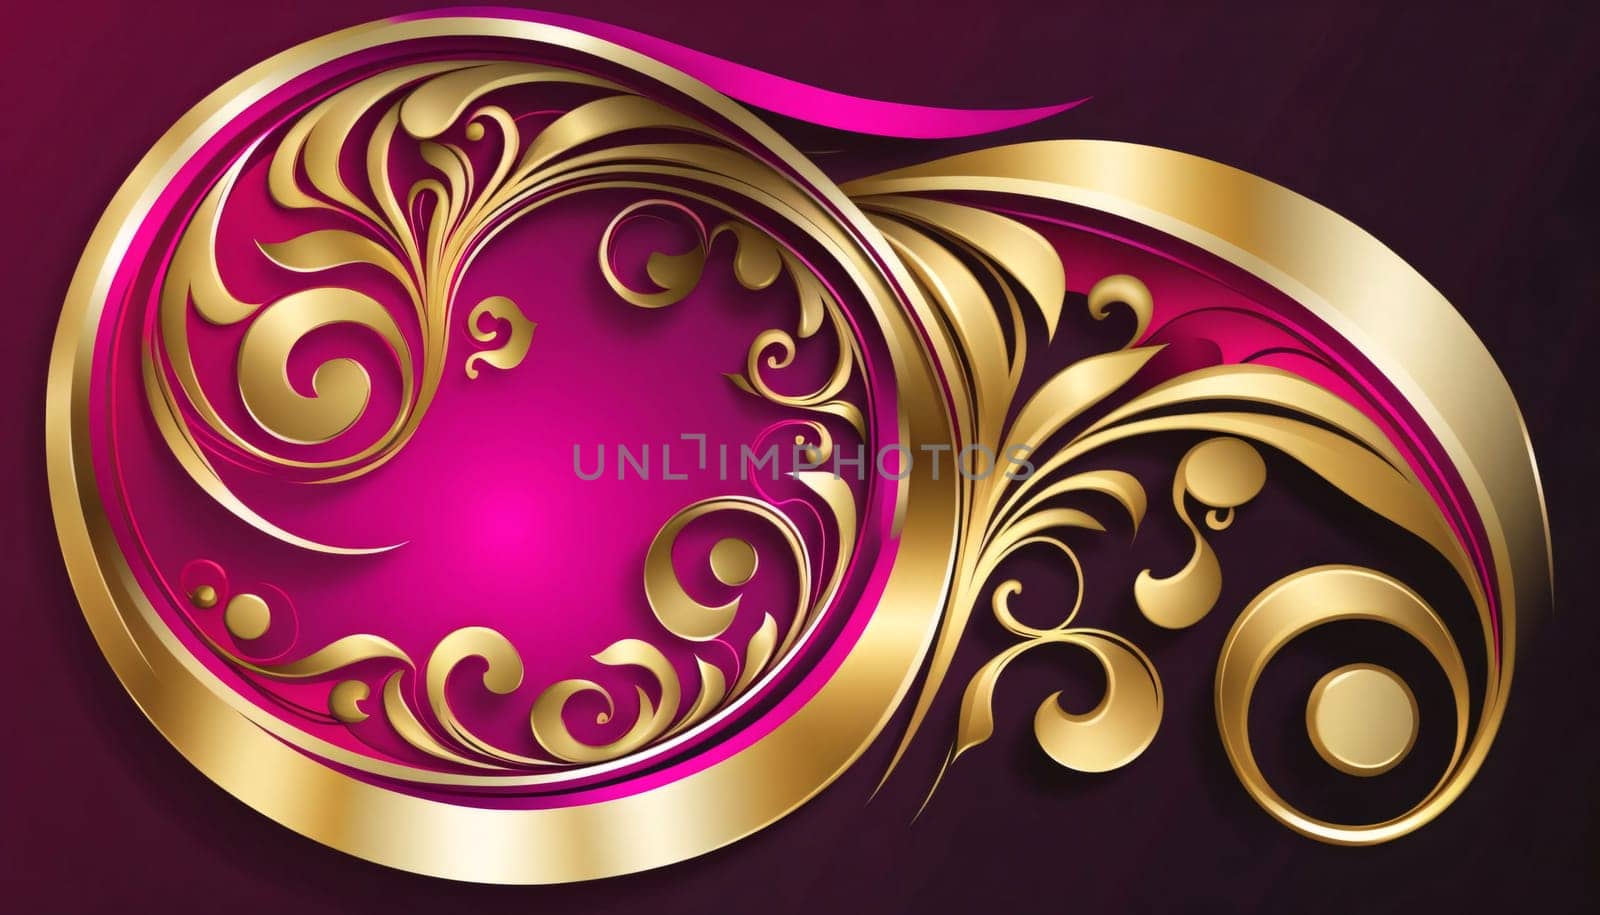 Abstract vector floral background with golden swirls and place for your text by ThemesS